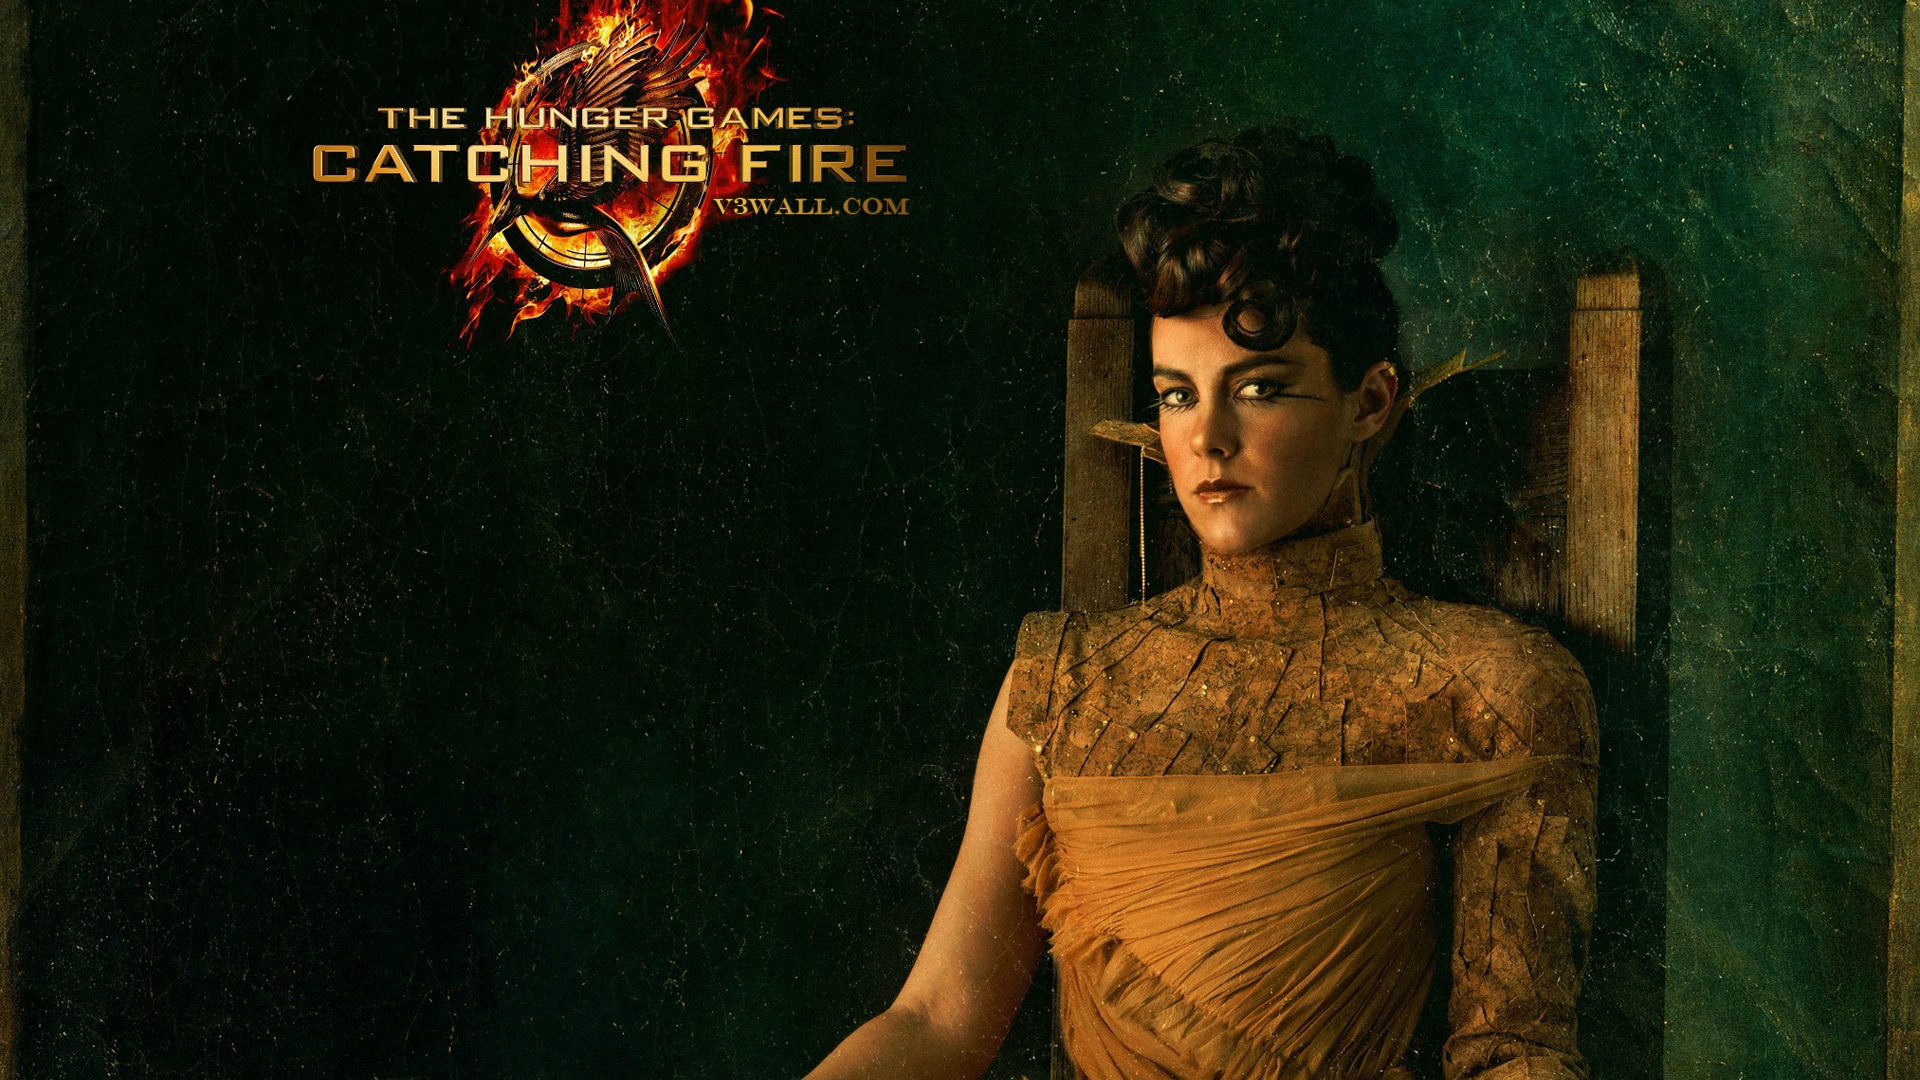 The Hunger Games: Catching Fire wallpapers HD #16 - 1920x1080